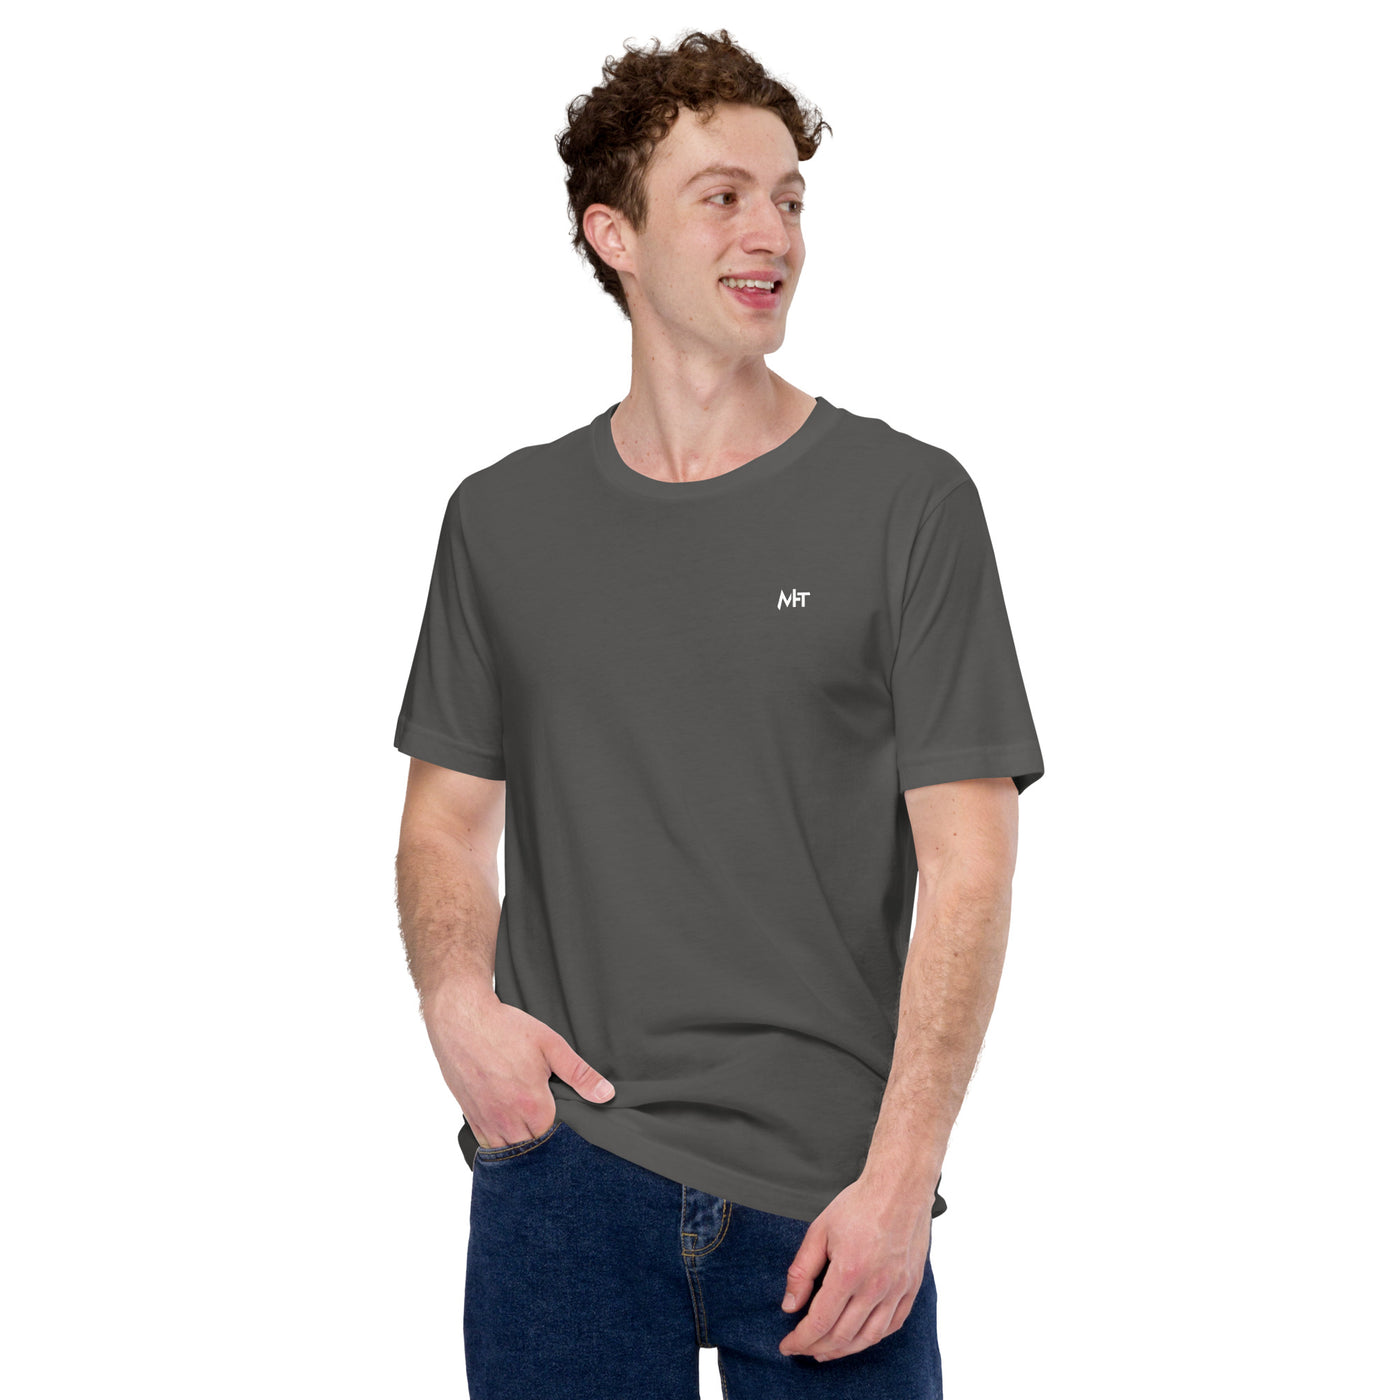 You are not expected to Understand this V1 - Unisex t-shirt ( Back Print )